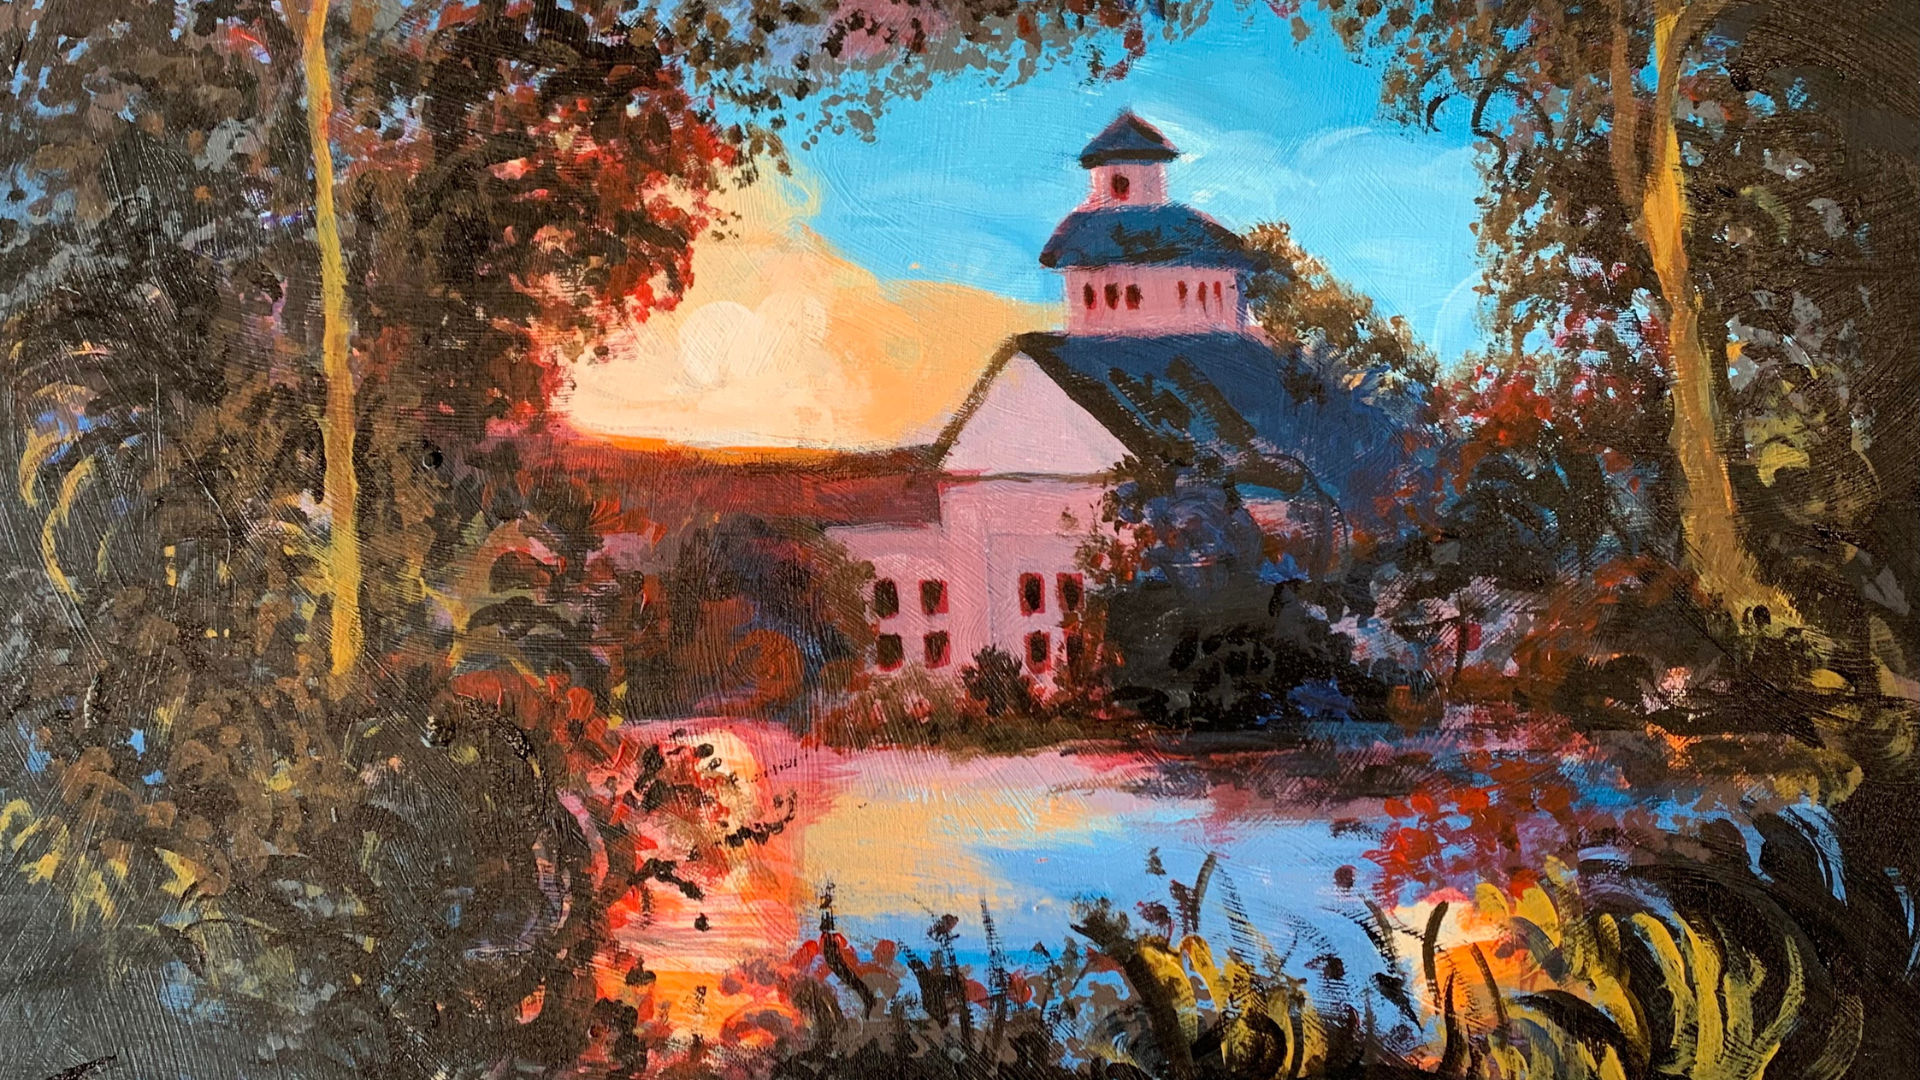 A painting of a church viewed through a small opening in a dense forest.